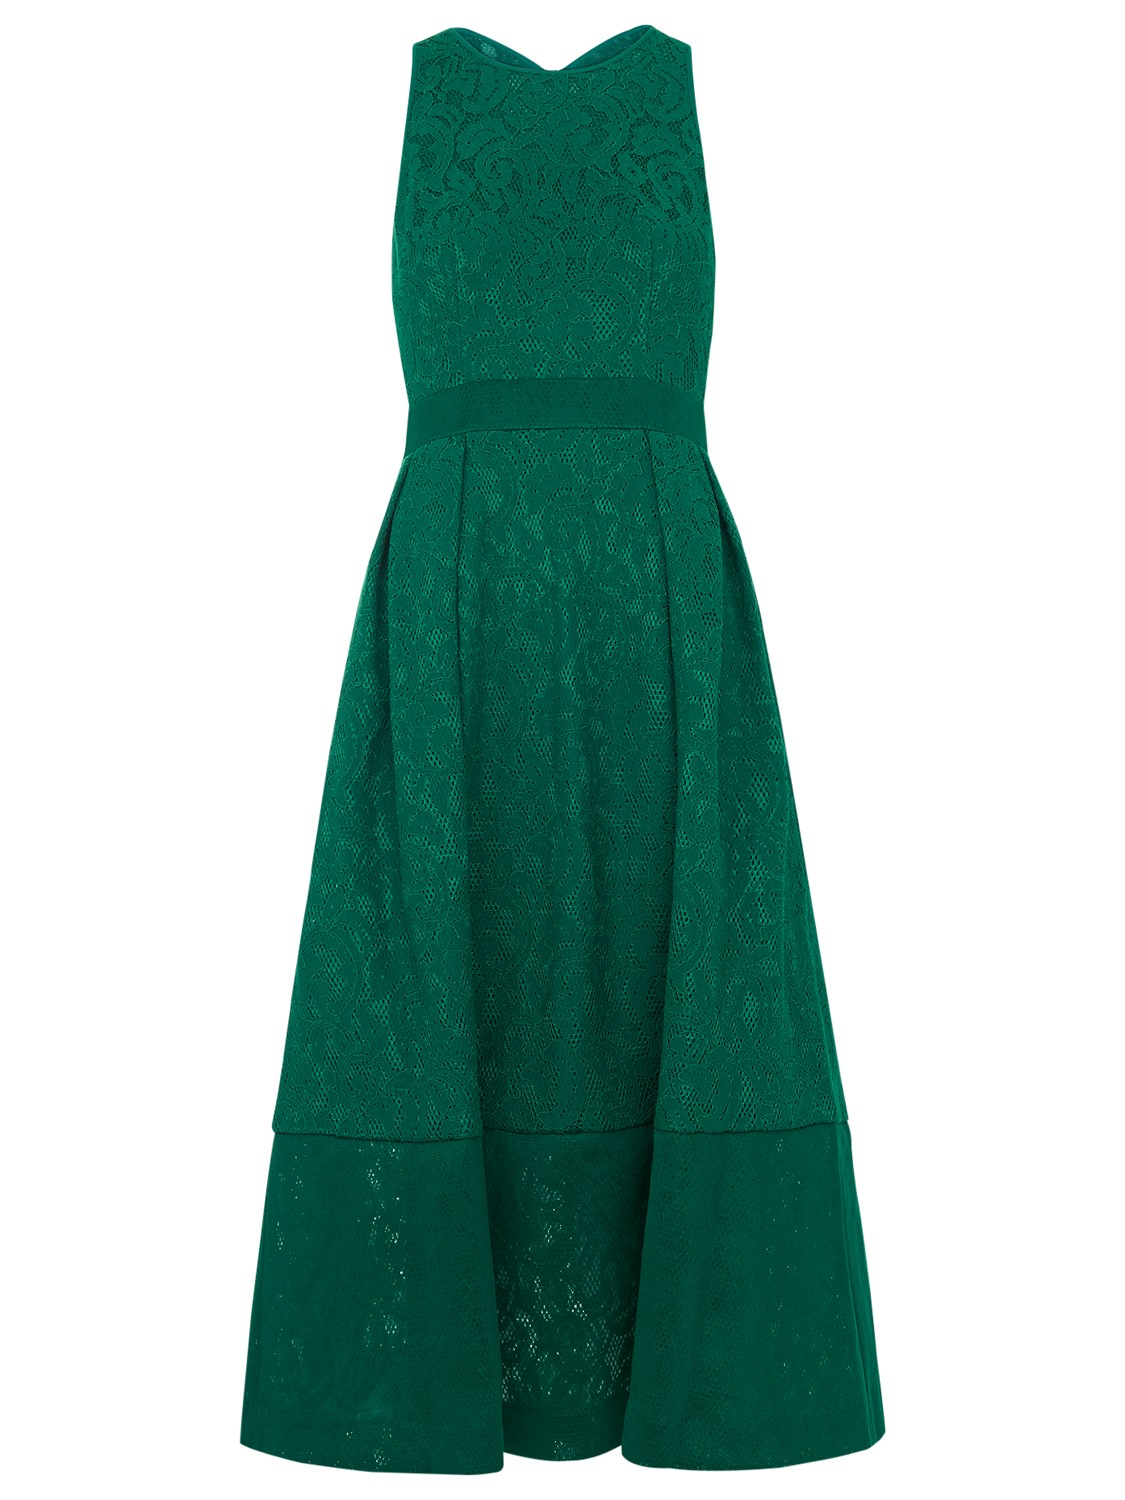 Whistles Bonded Lace Dress in Green - Lyst